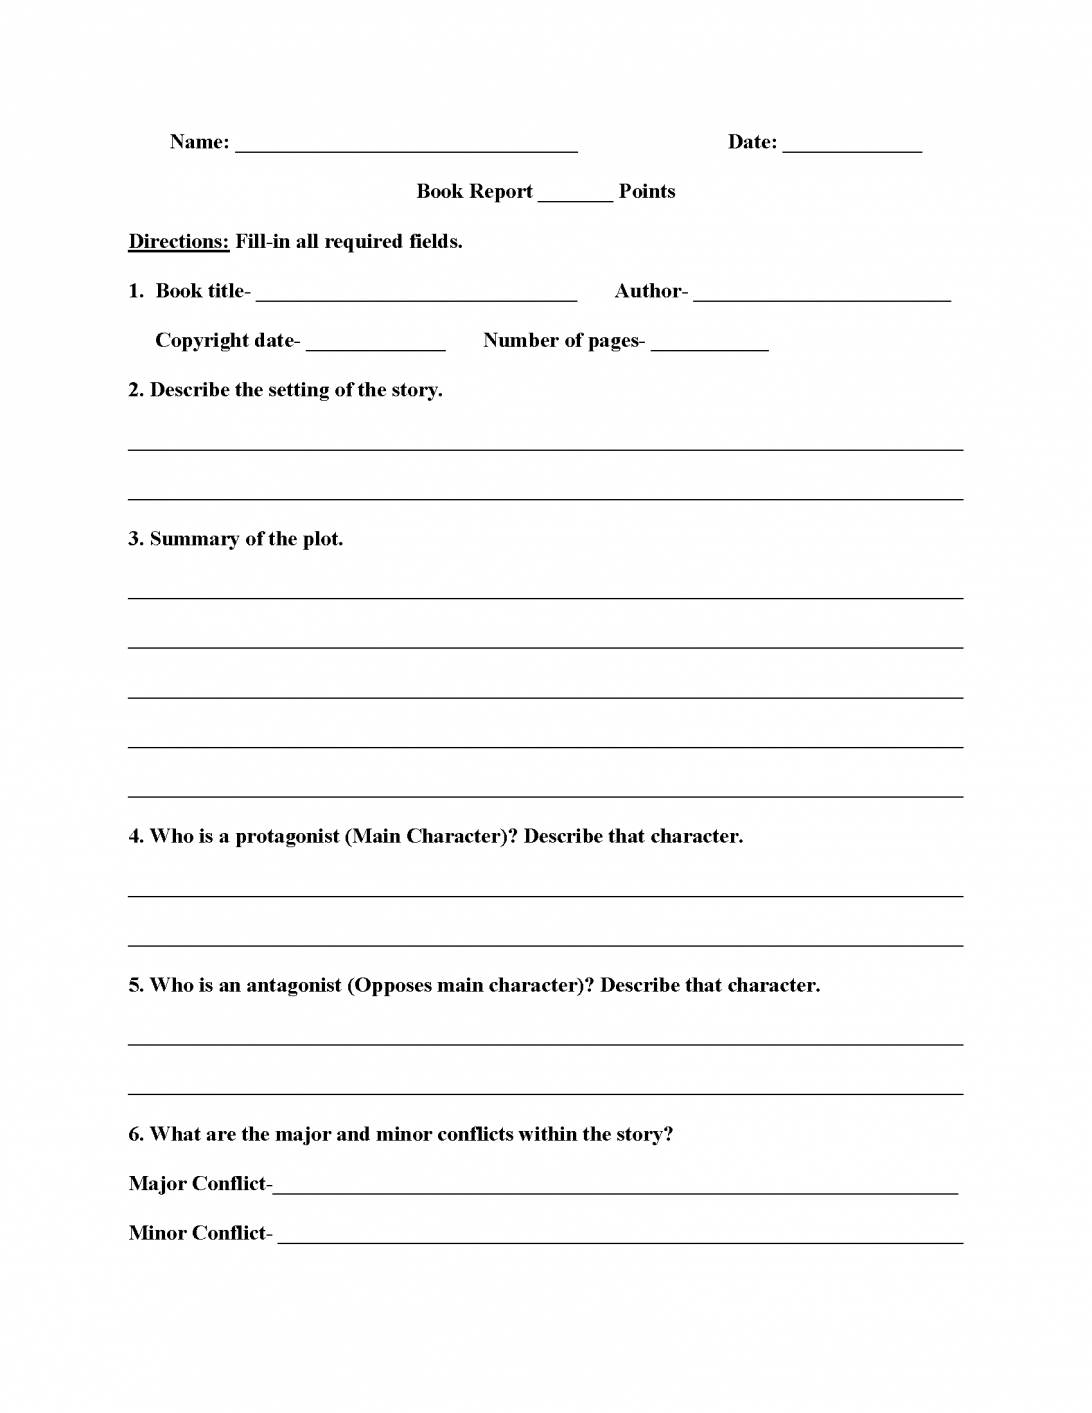 Book Report Template 10 6Th Grade Format Billy Star With Regard To Book Report Template 3Rd Grade